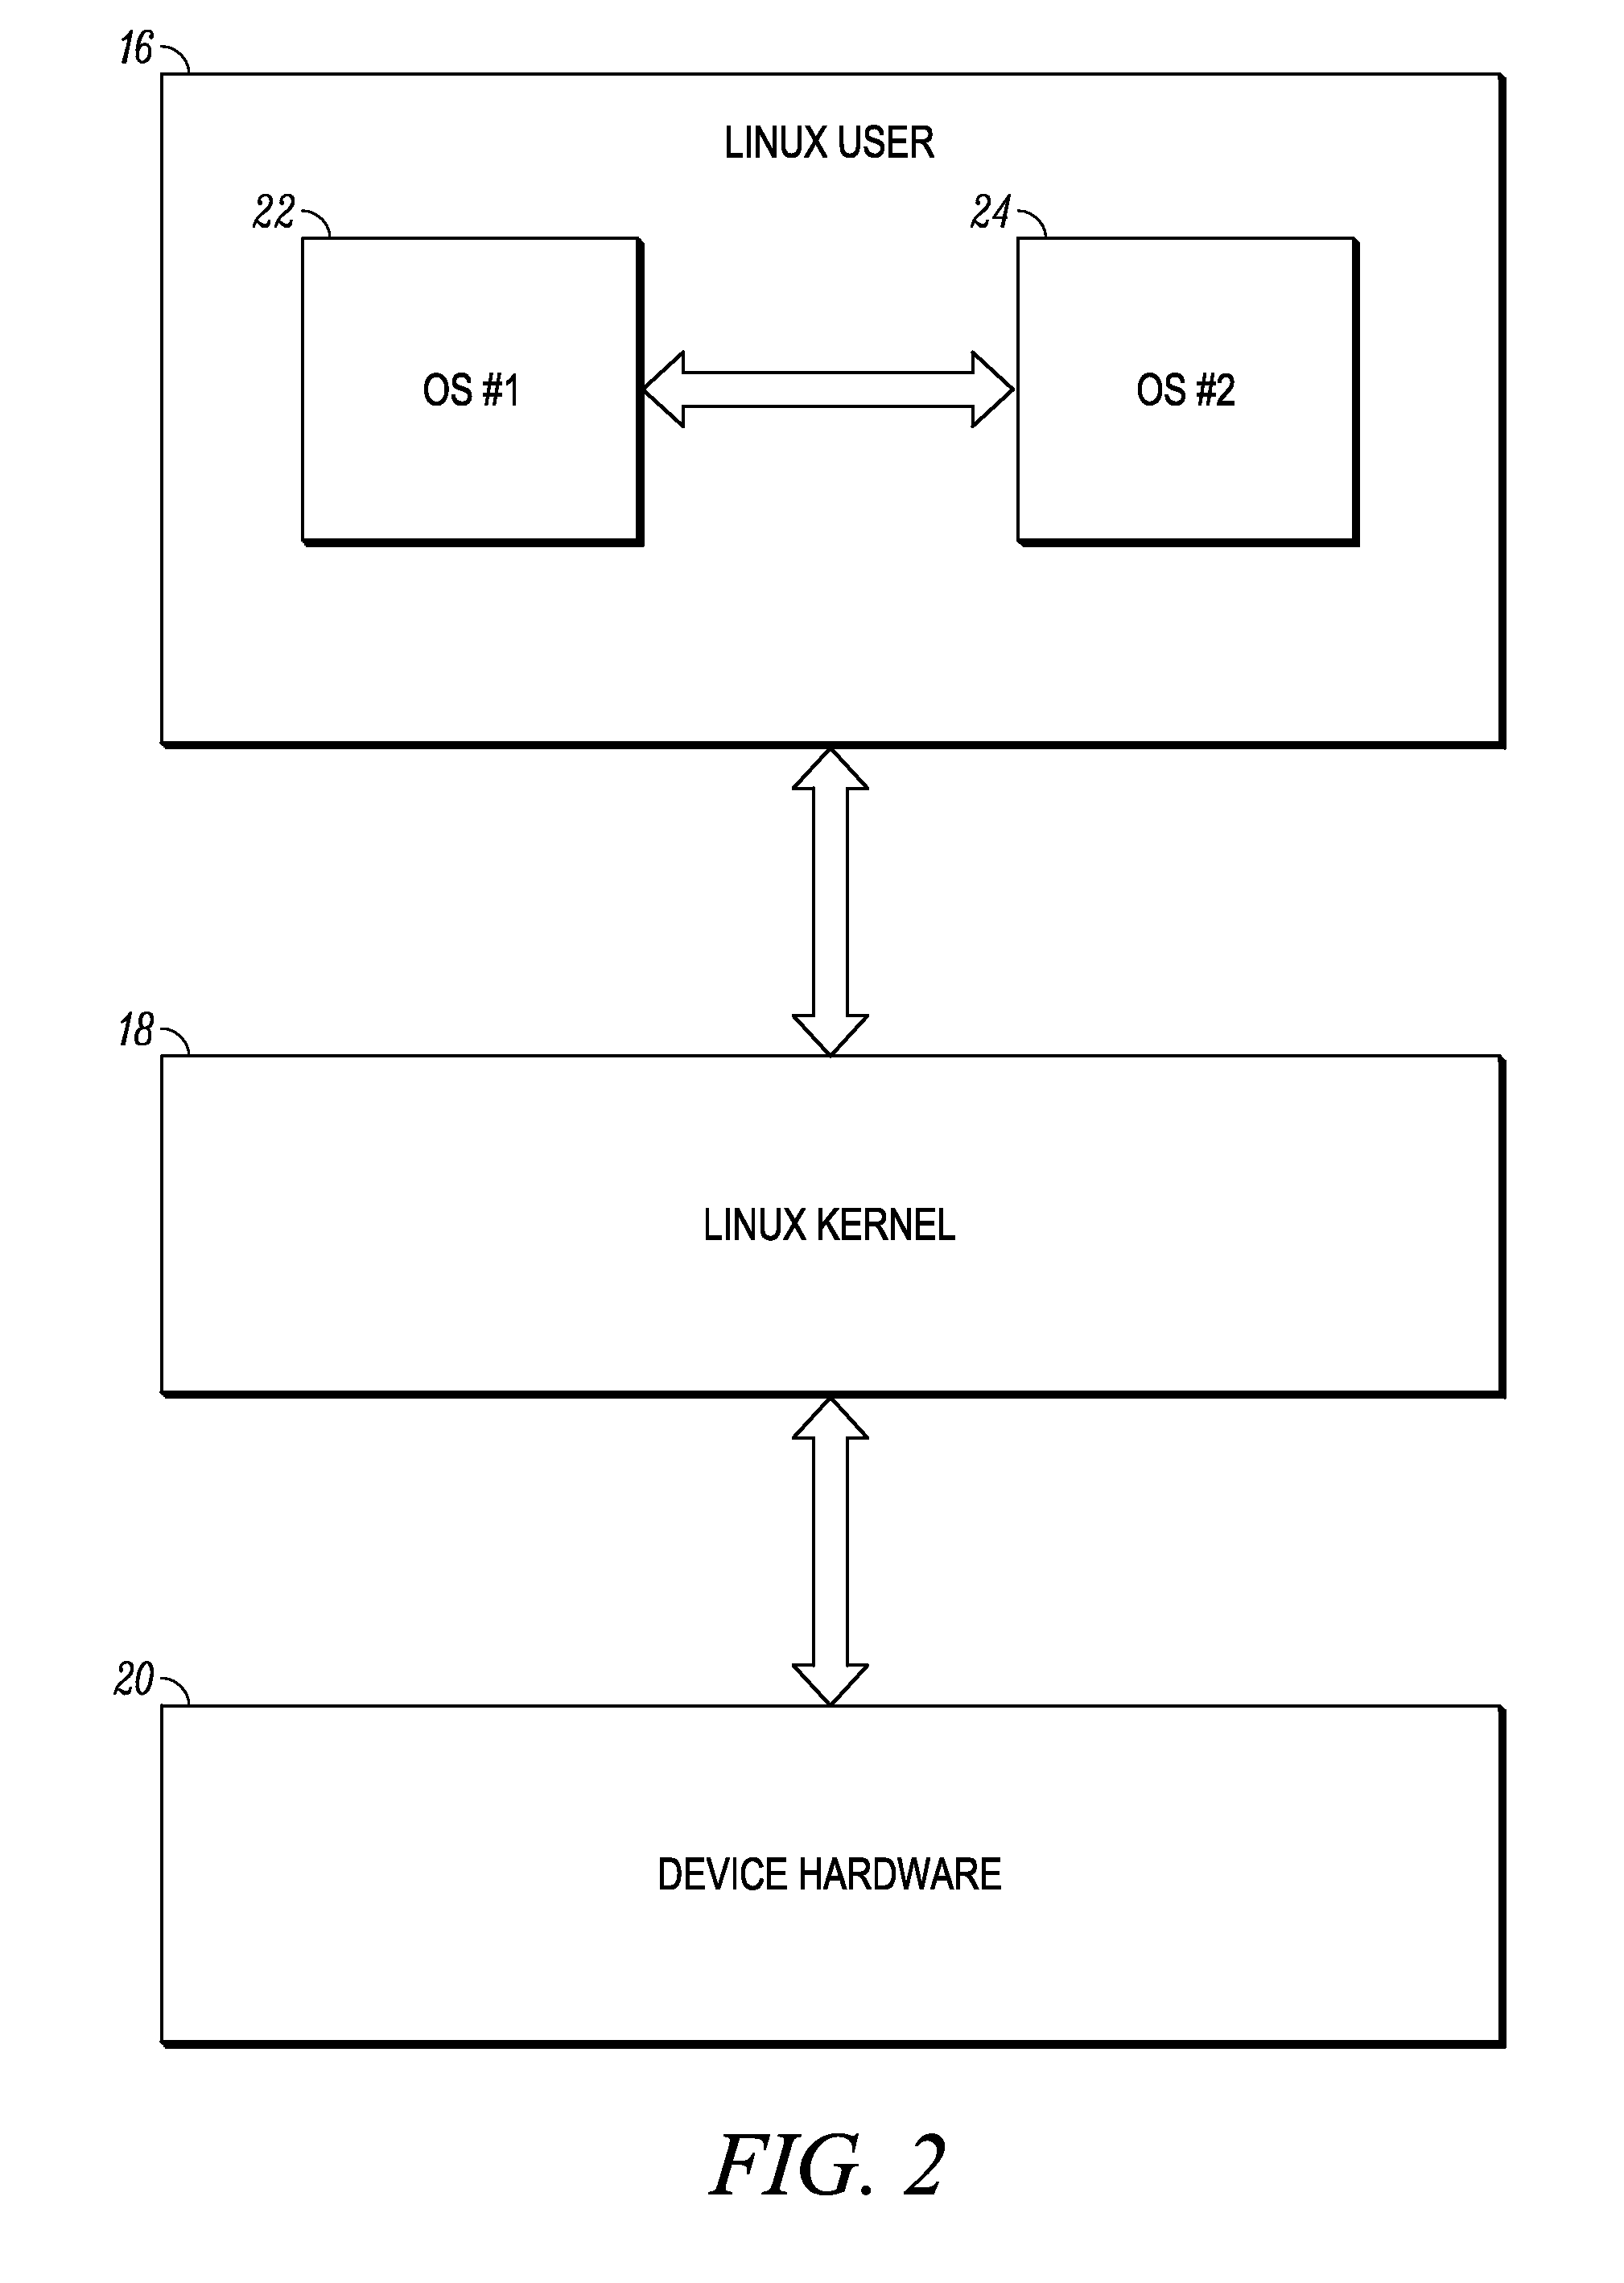 System and method for switching between environments in a multi-environment operating system